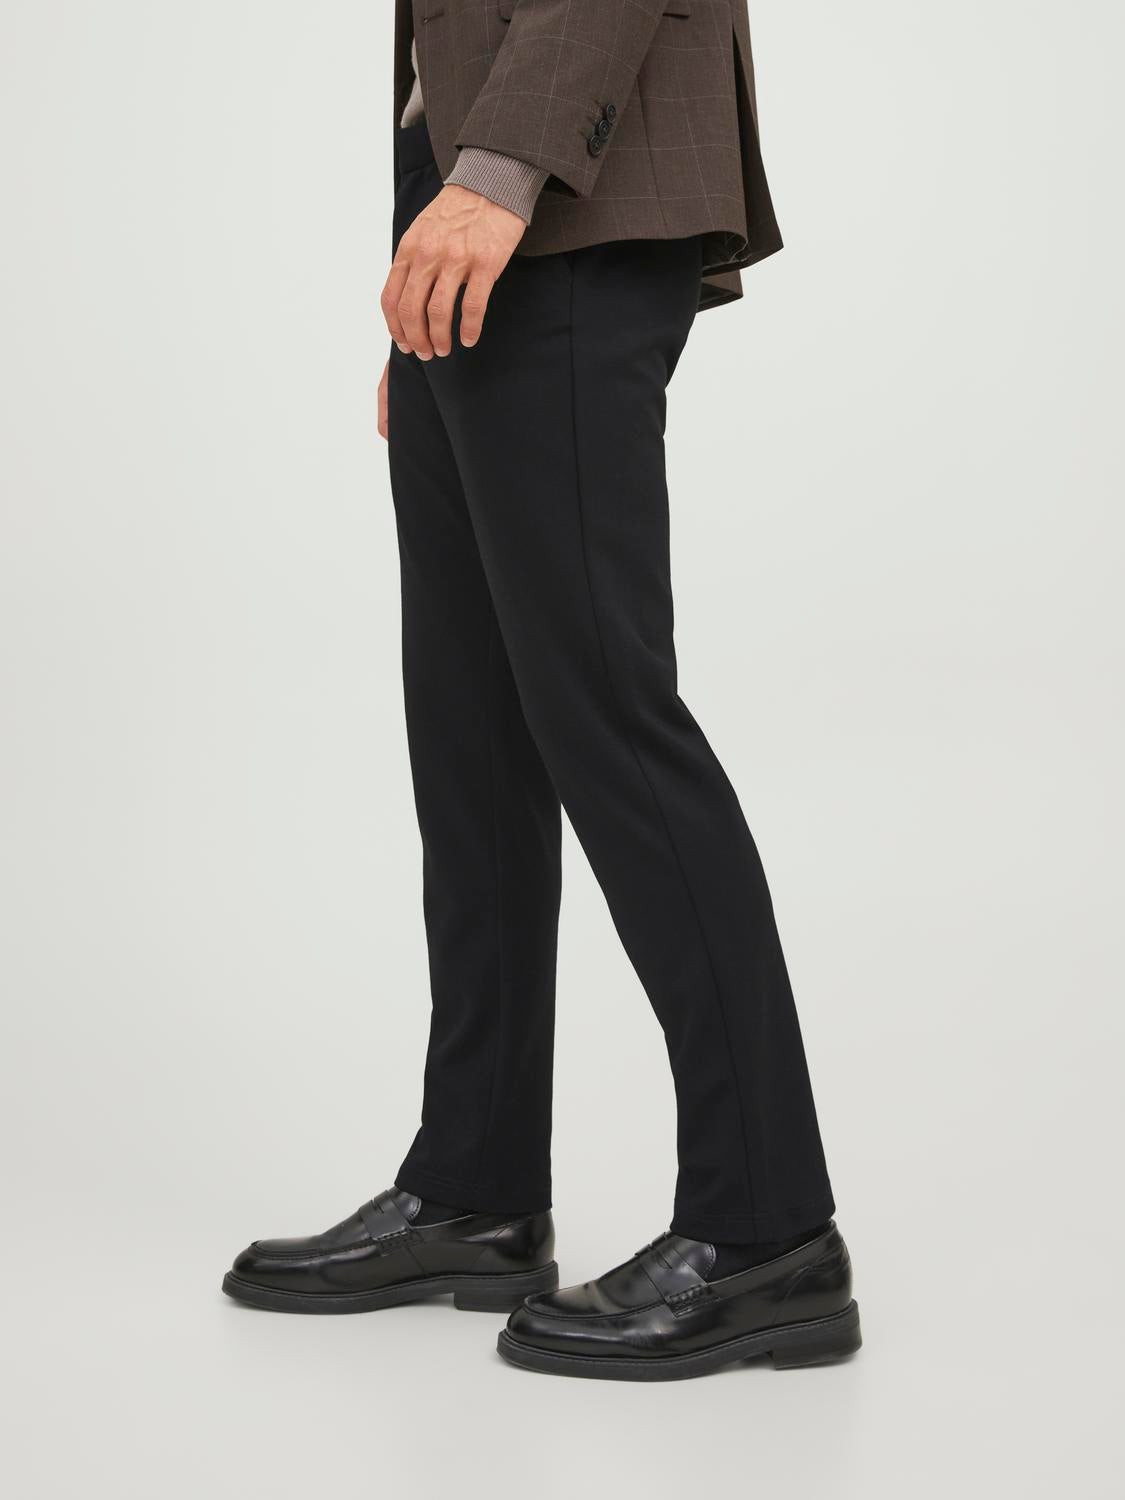 Buy Men Olive Solid Slim Fit Casual Trousers Online - 700004 | Peter England